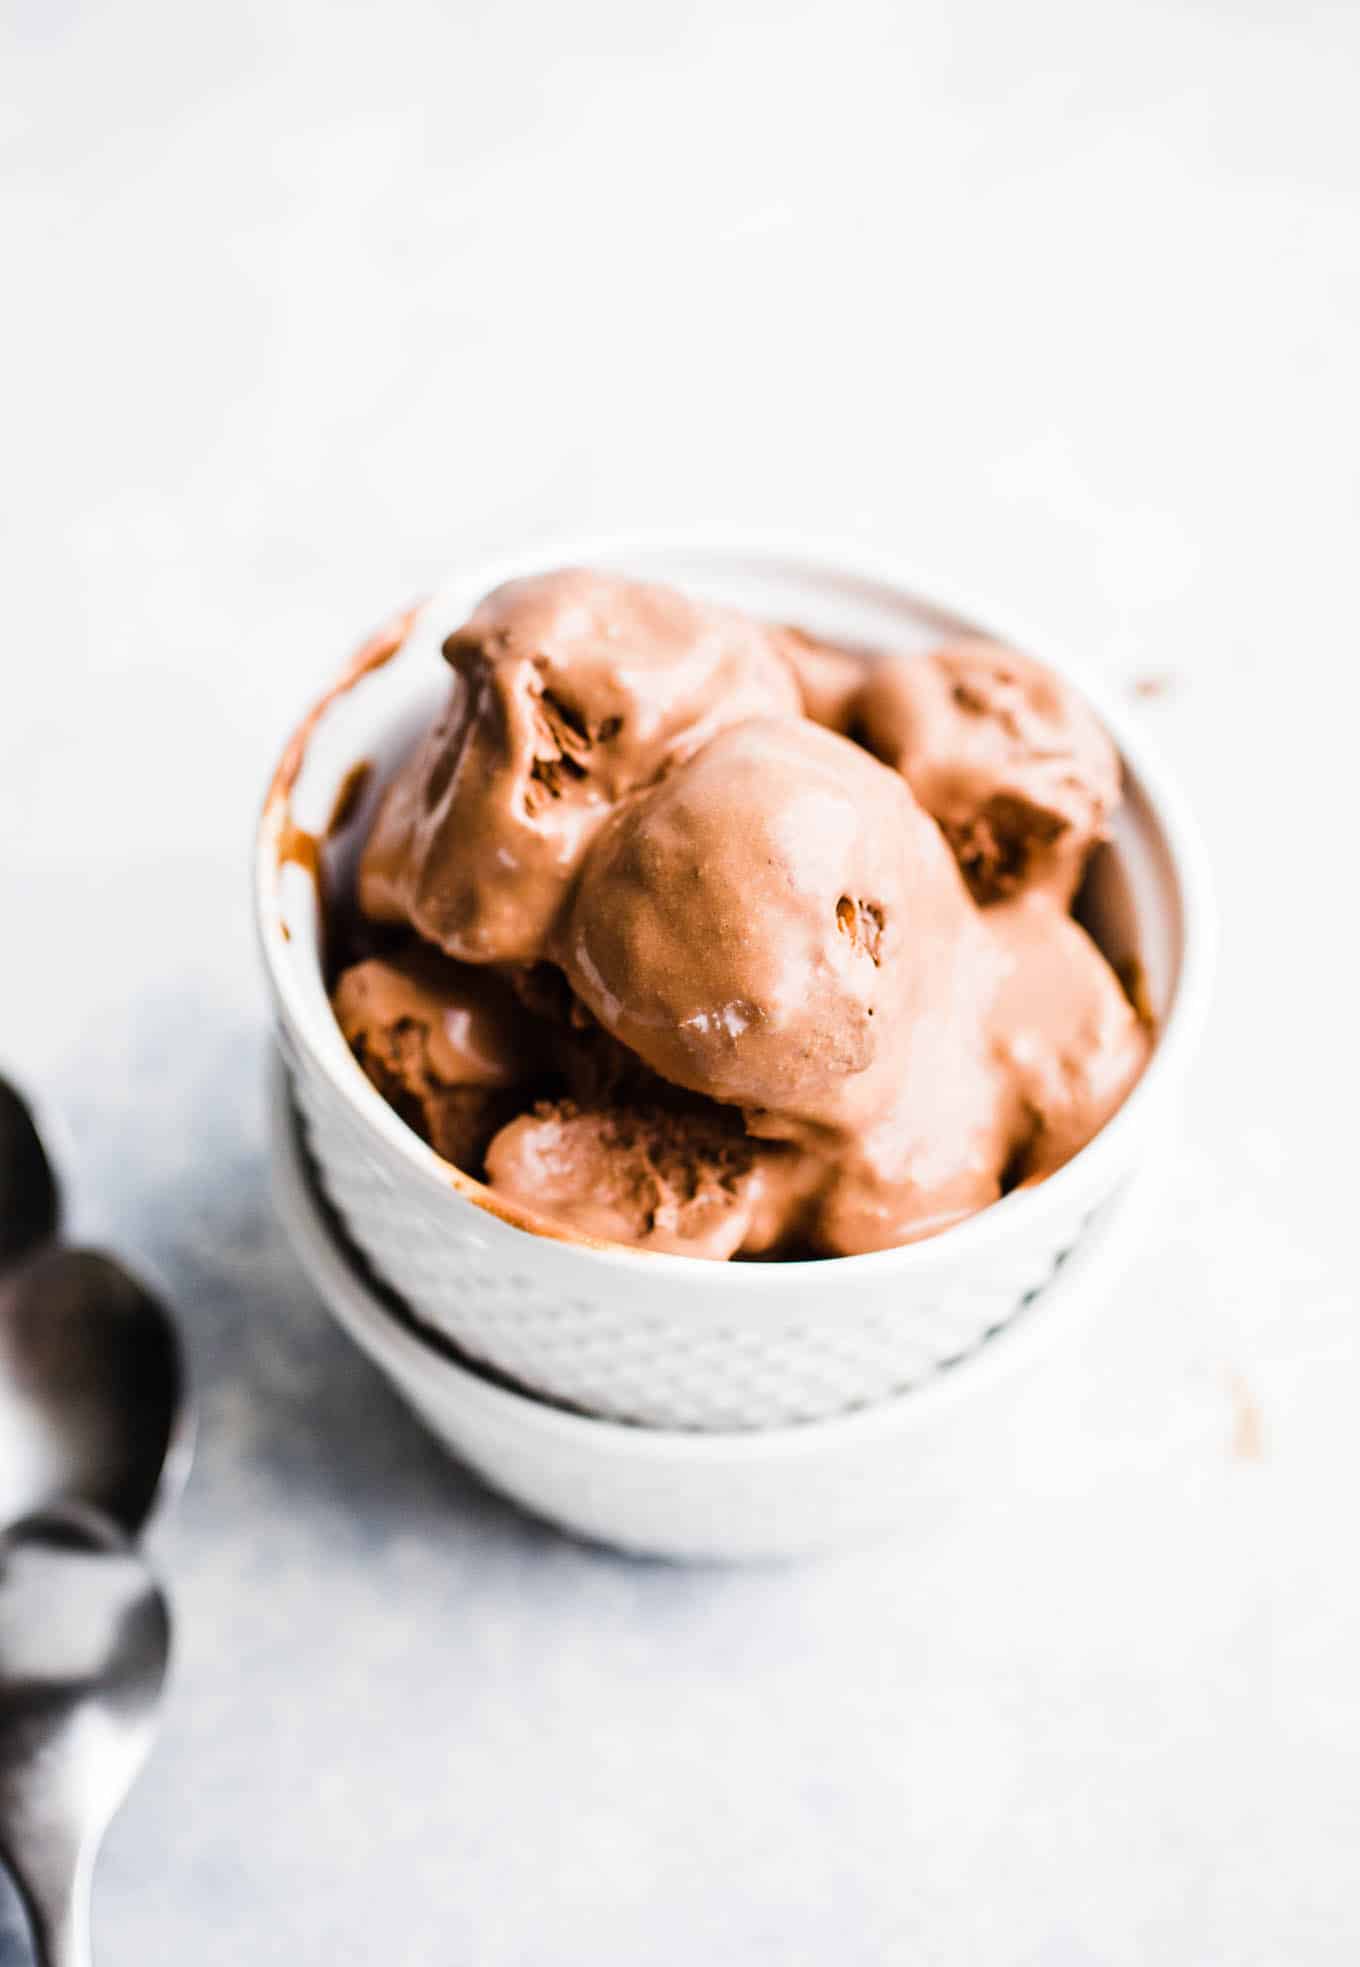 Scoops of chocolate ice cream in a white bowl.